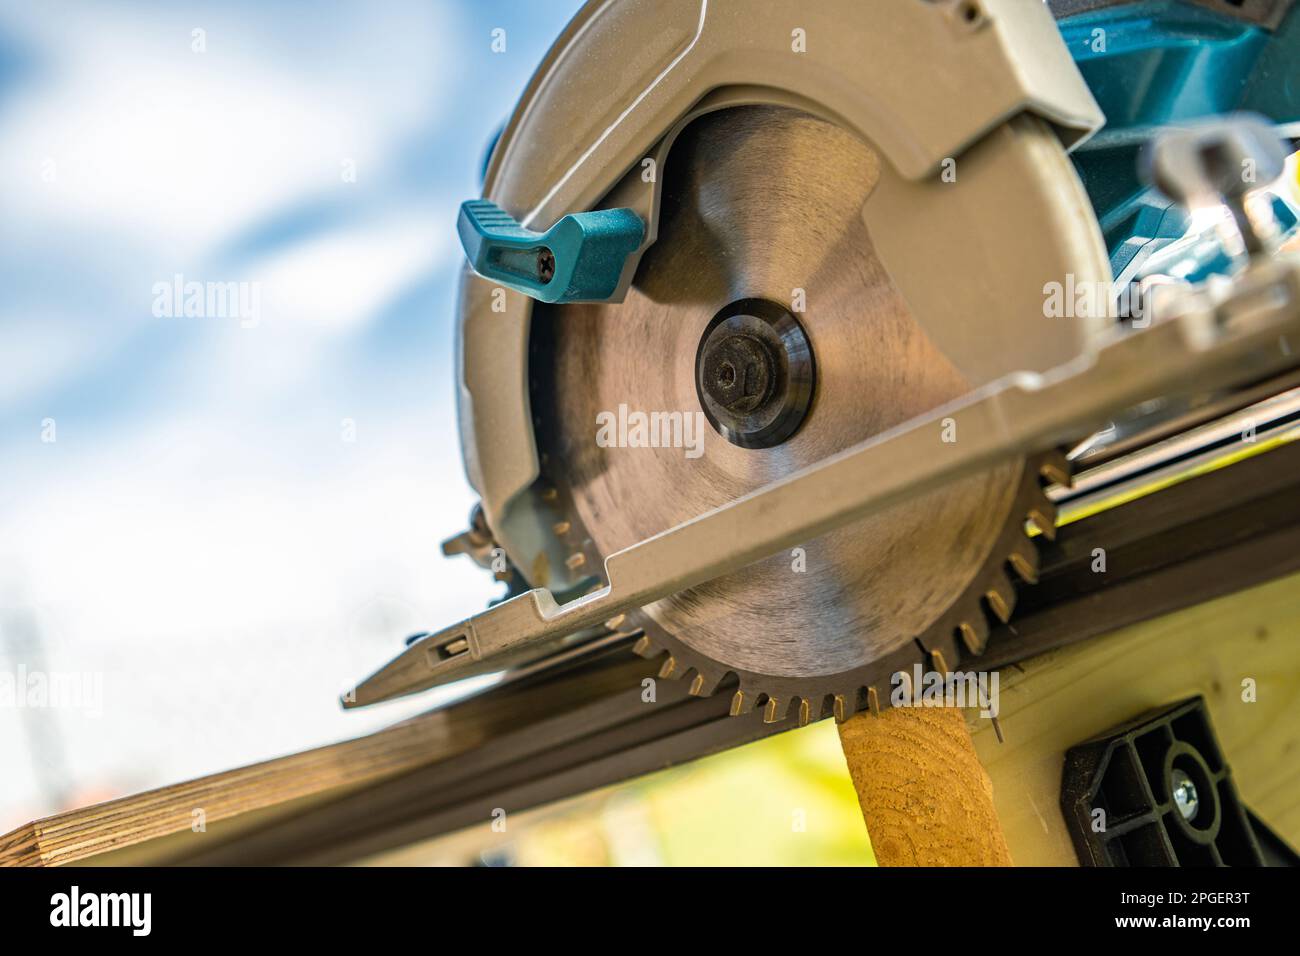 Circular Handheld Wood Saw Inside the Workshop Close Up. Construction Industry Power Tools. Stock Photo